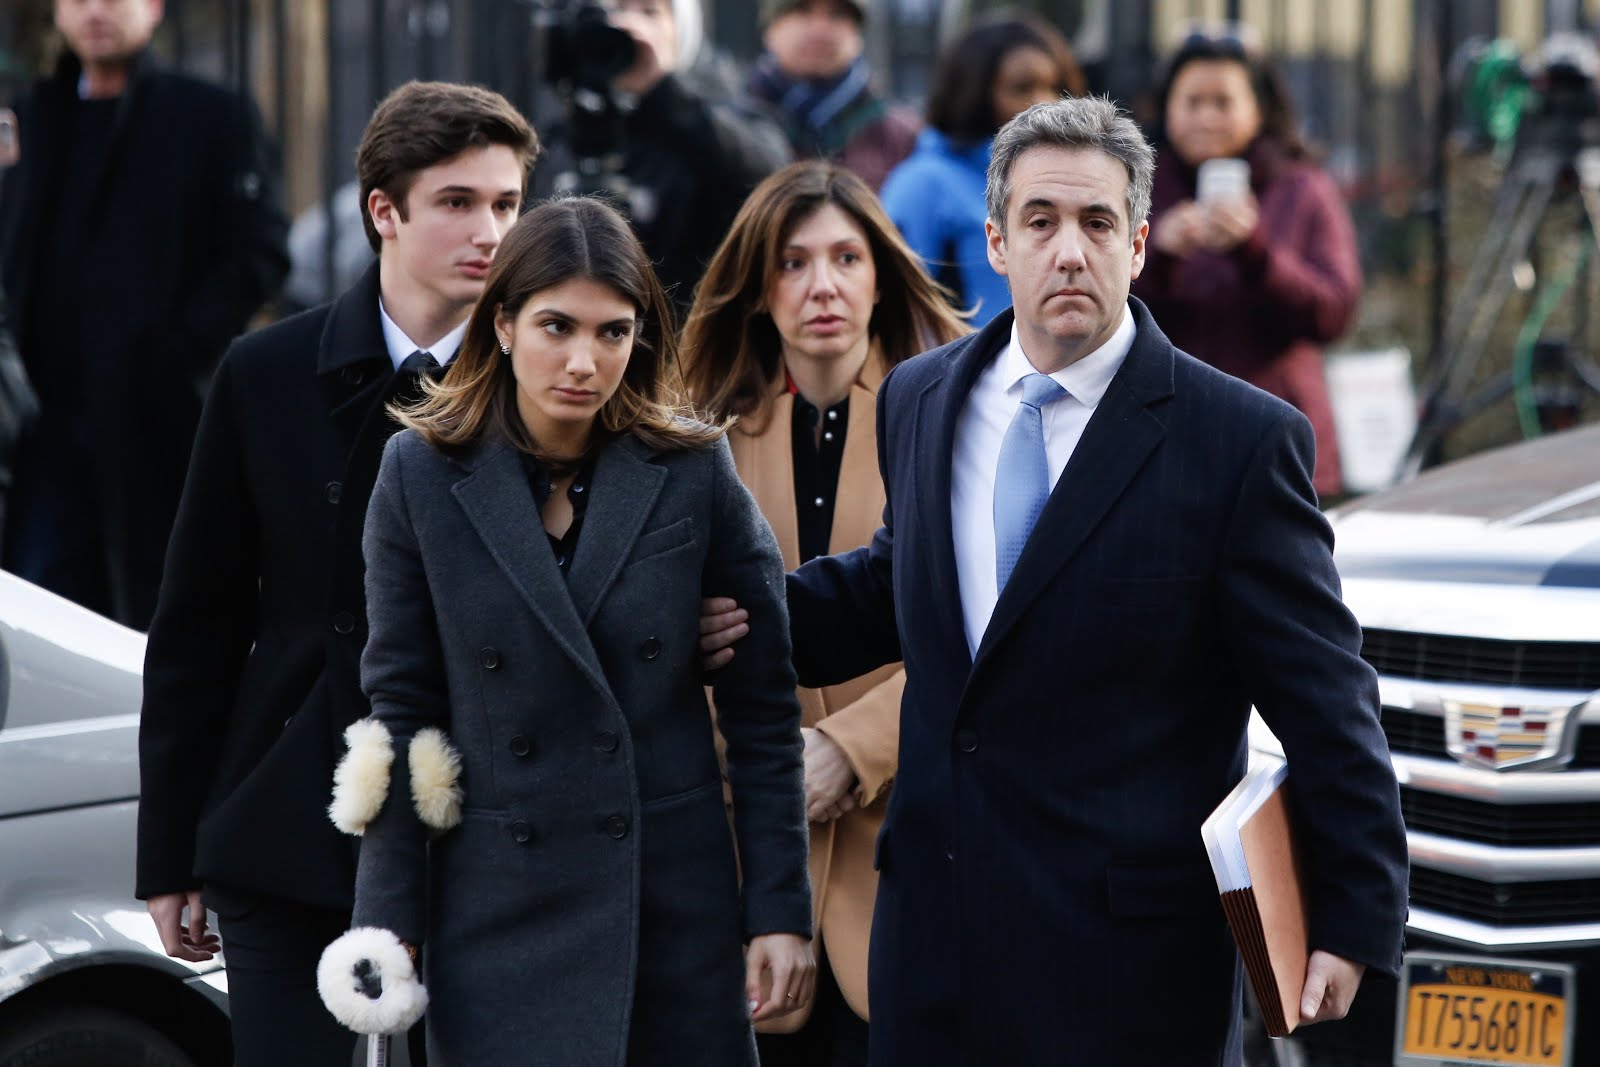 Lame Cherry: What about your Wife, Michael Cohen